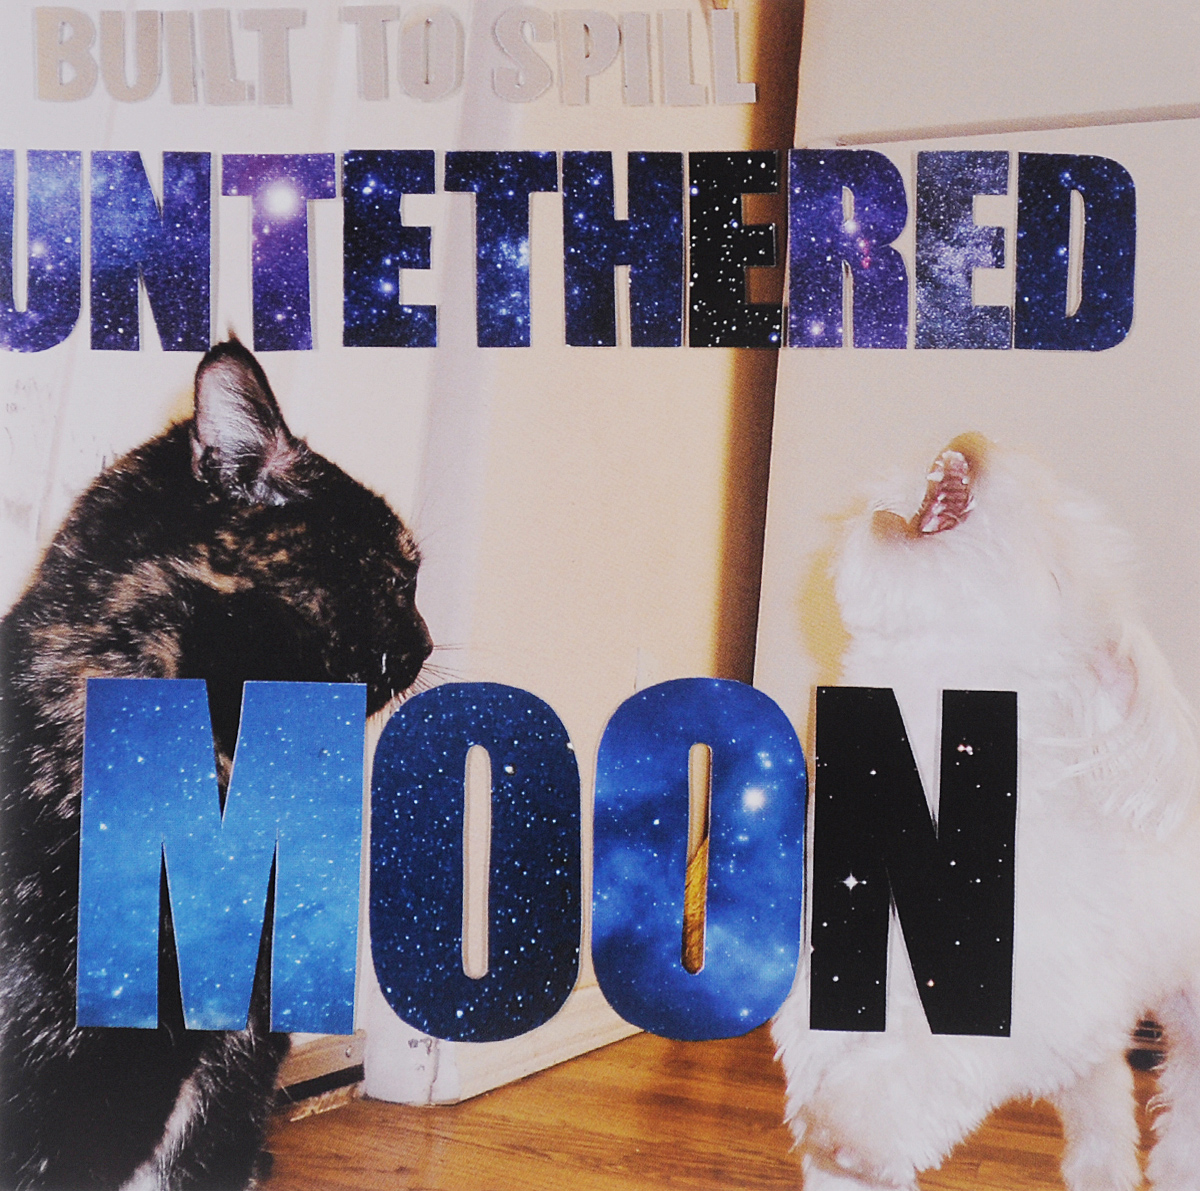 Built To Spill. Untethered Moon